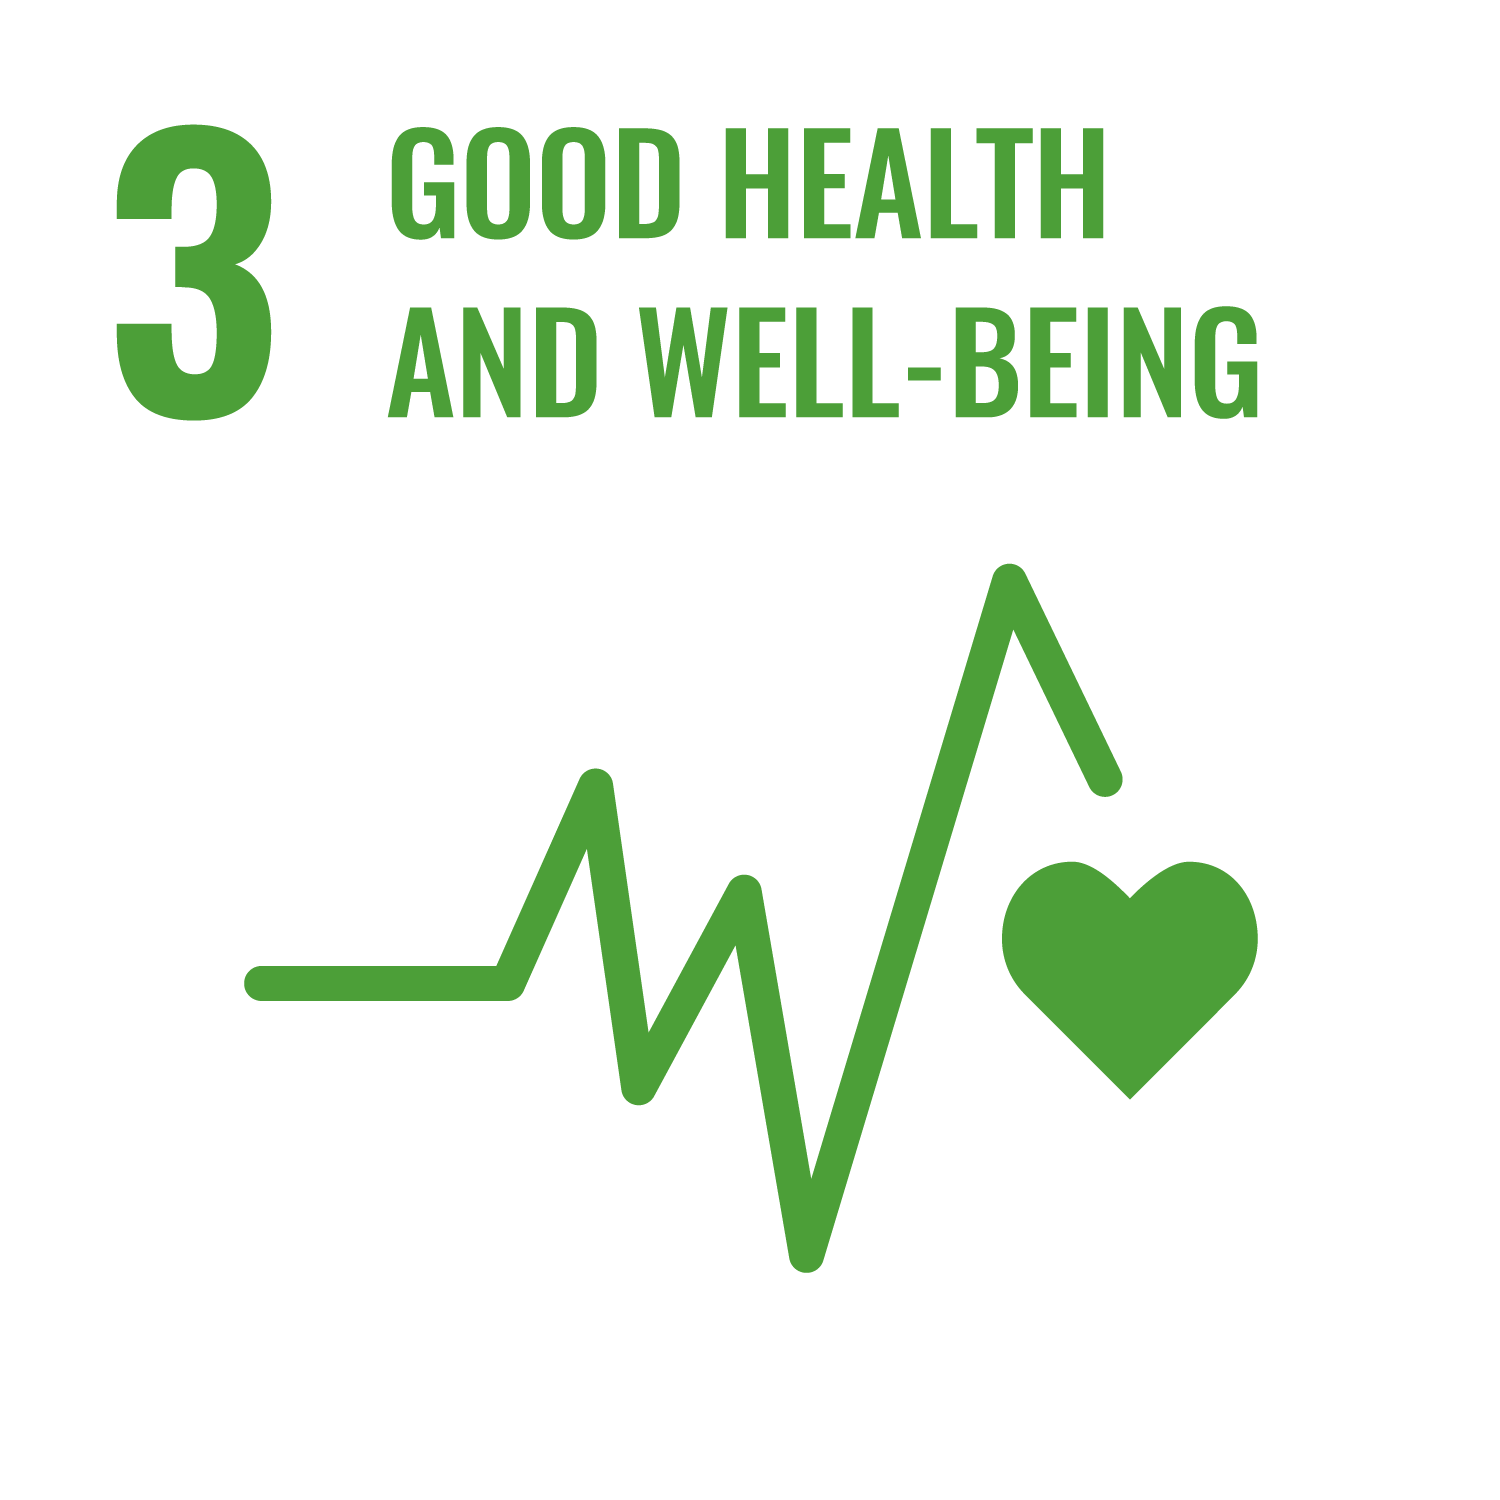 a green heart beat icon represents Goal 3: Good Health and Well-being